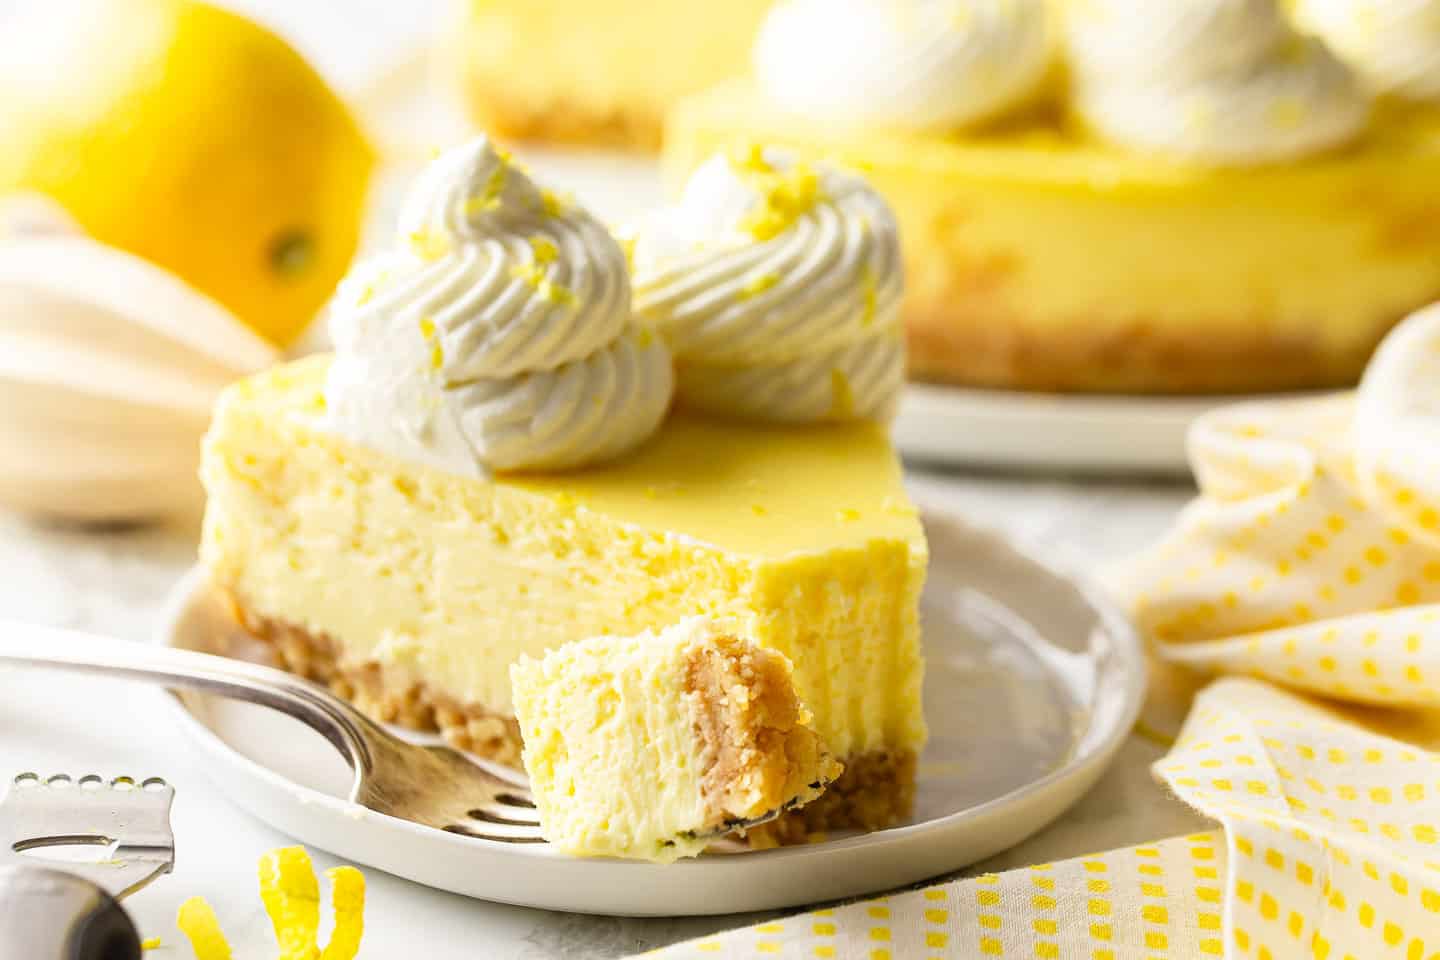 Best lemon cheesecake recipe, sliced and served with a bite taken out.